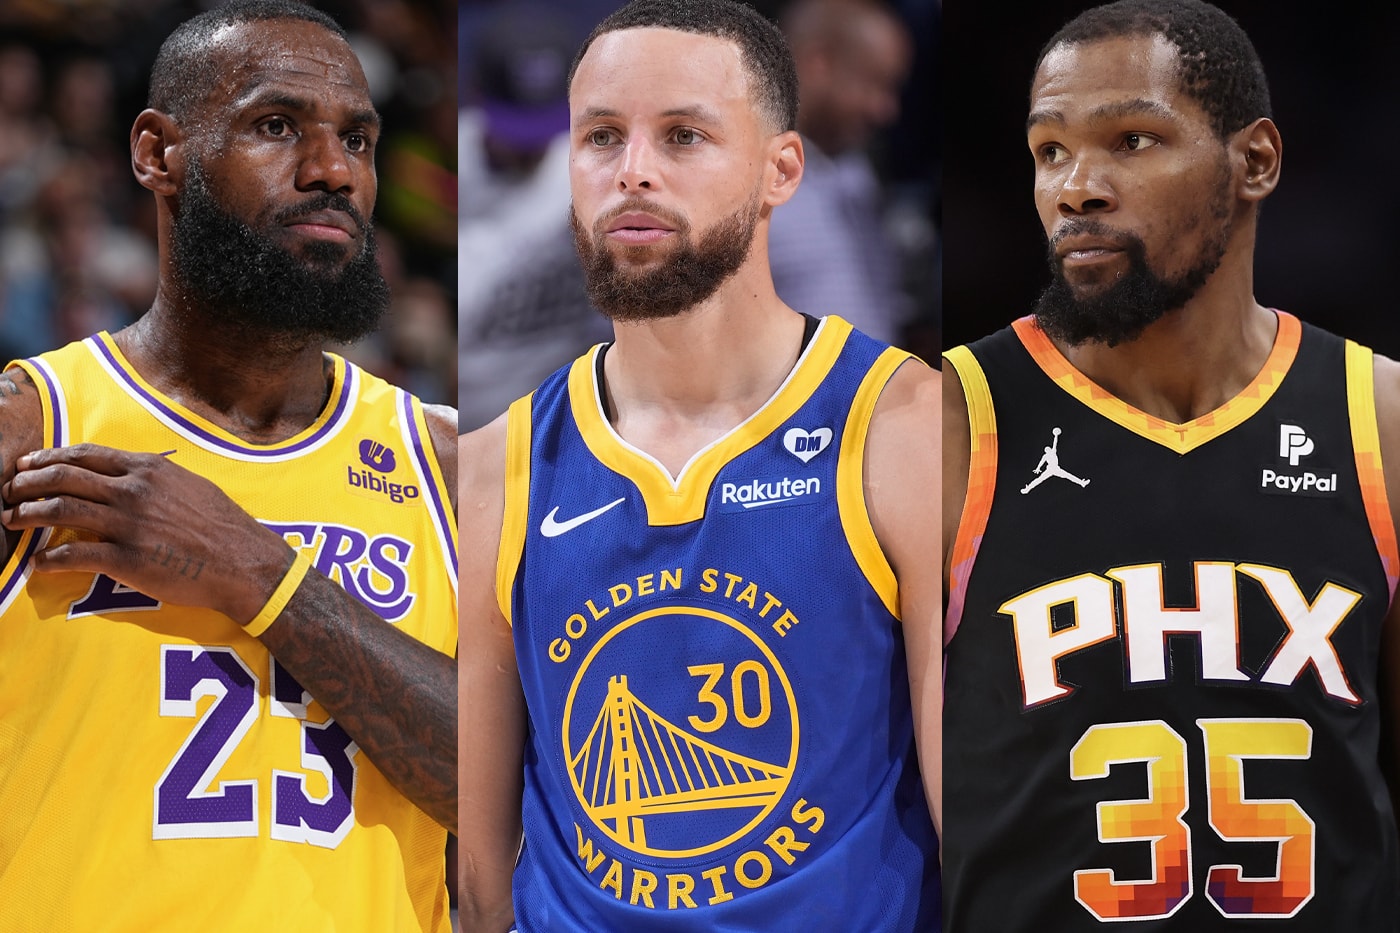 LeBron James, Steph Curry and Kevin Durant Wont Play in NBA Playoffs' 2nd Round for the First Time in 20 Years los angeles lakers golden state warriors kevin durant kd stephen threes king james end of an era dynasty